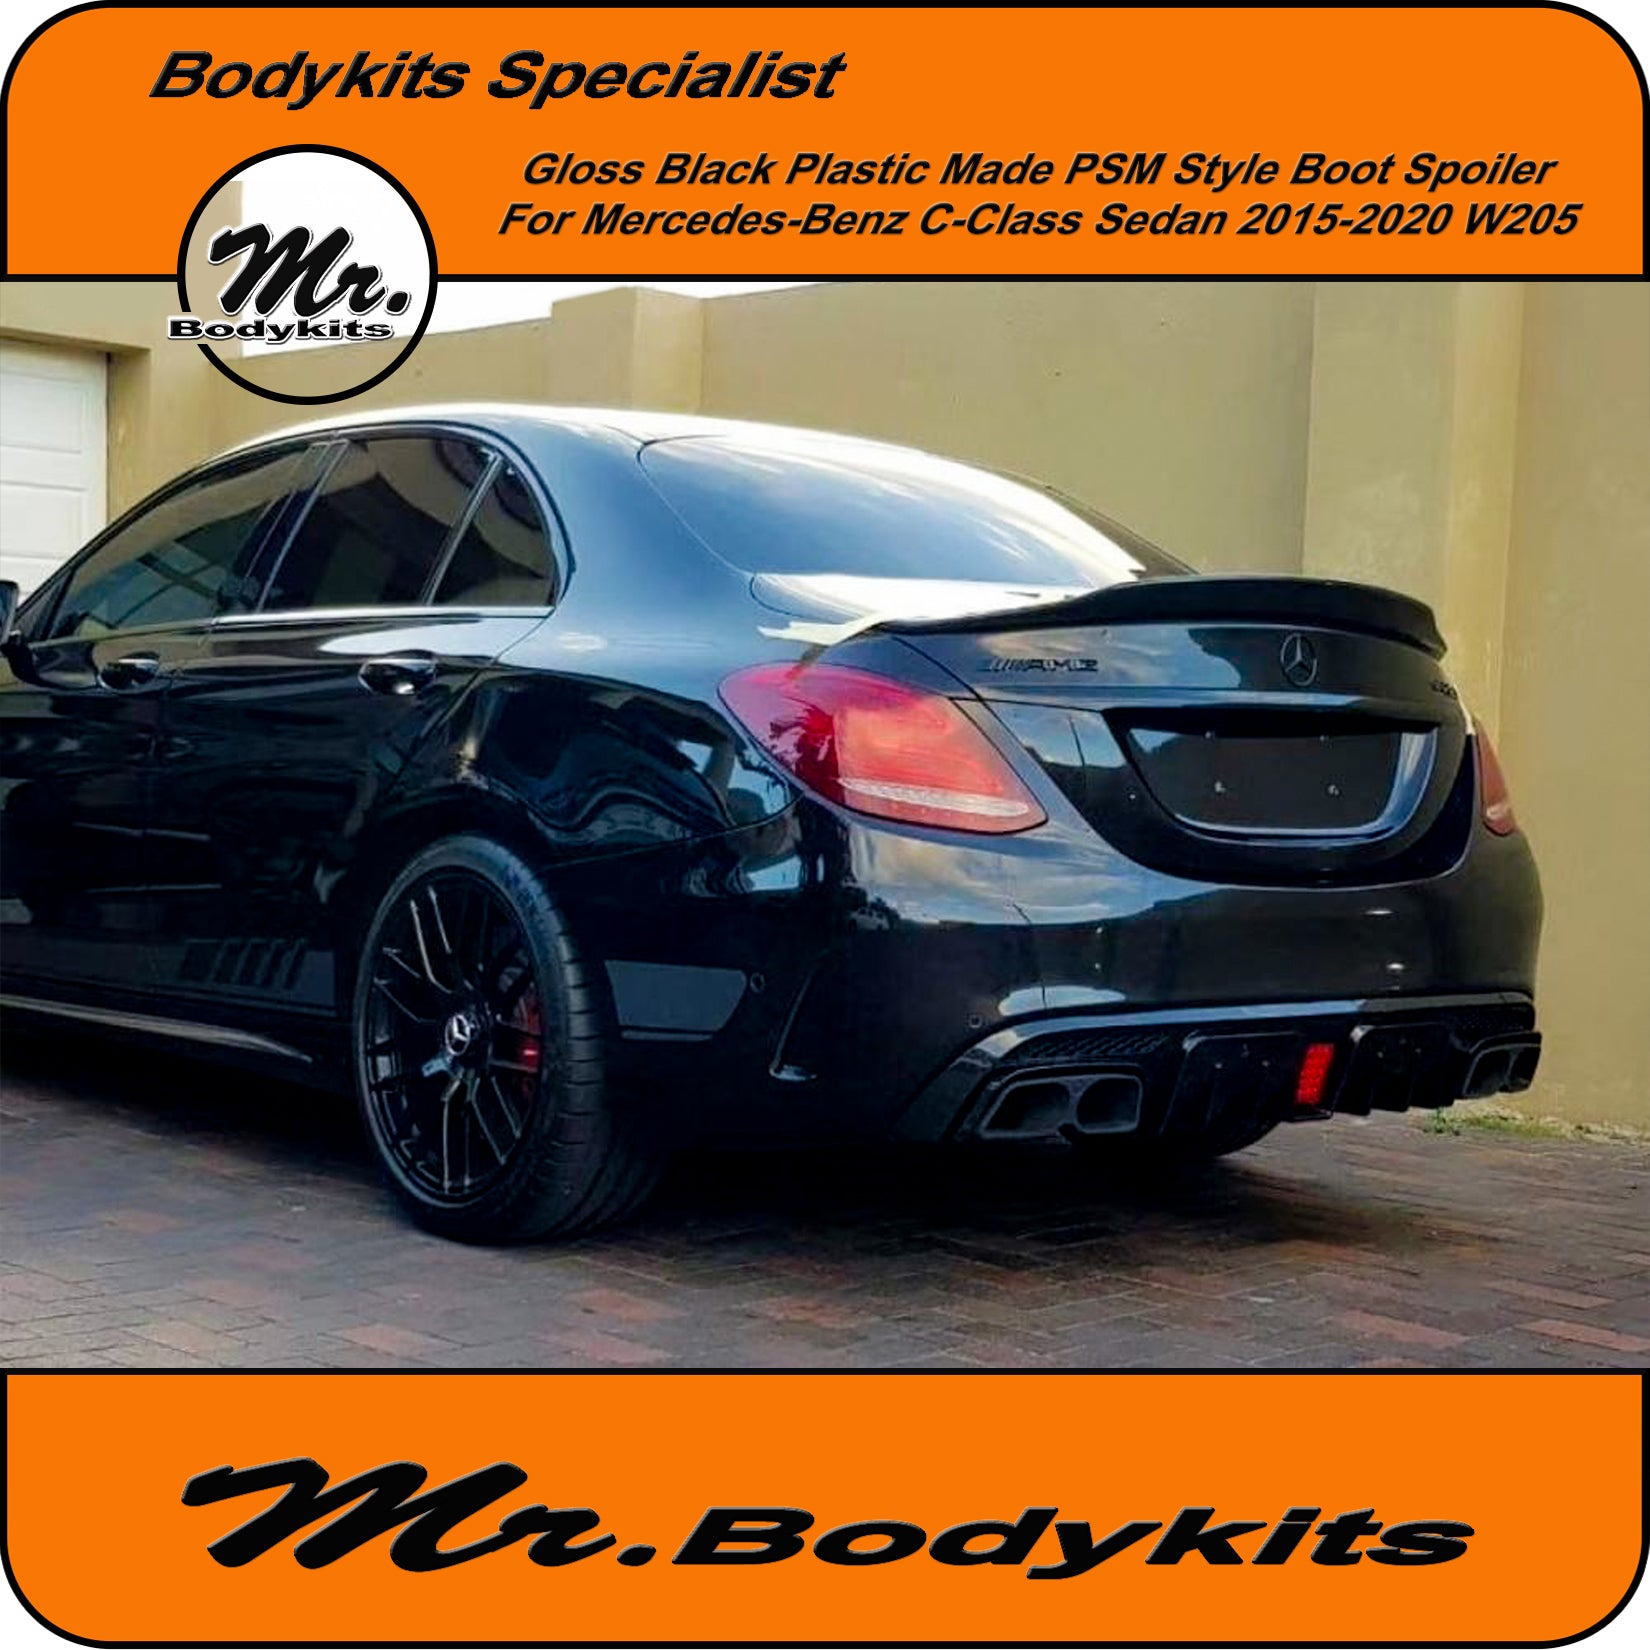 Gloss Black Finished PSM Style Rear Spoiler For Mercedes Benz C-Class - Mr  Bodykits